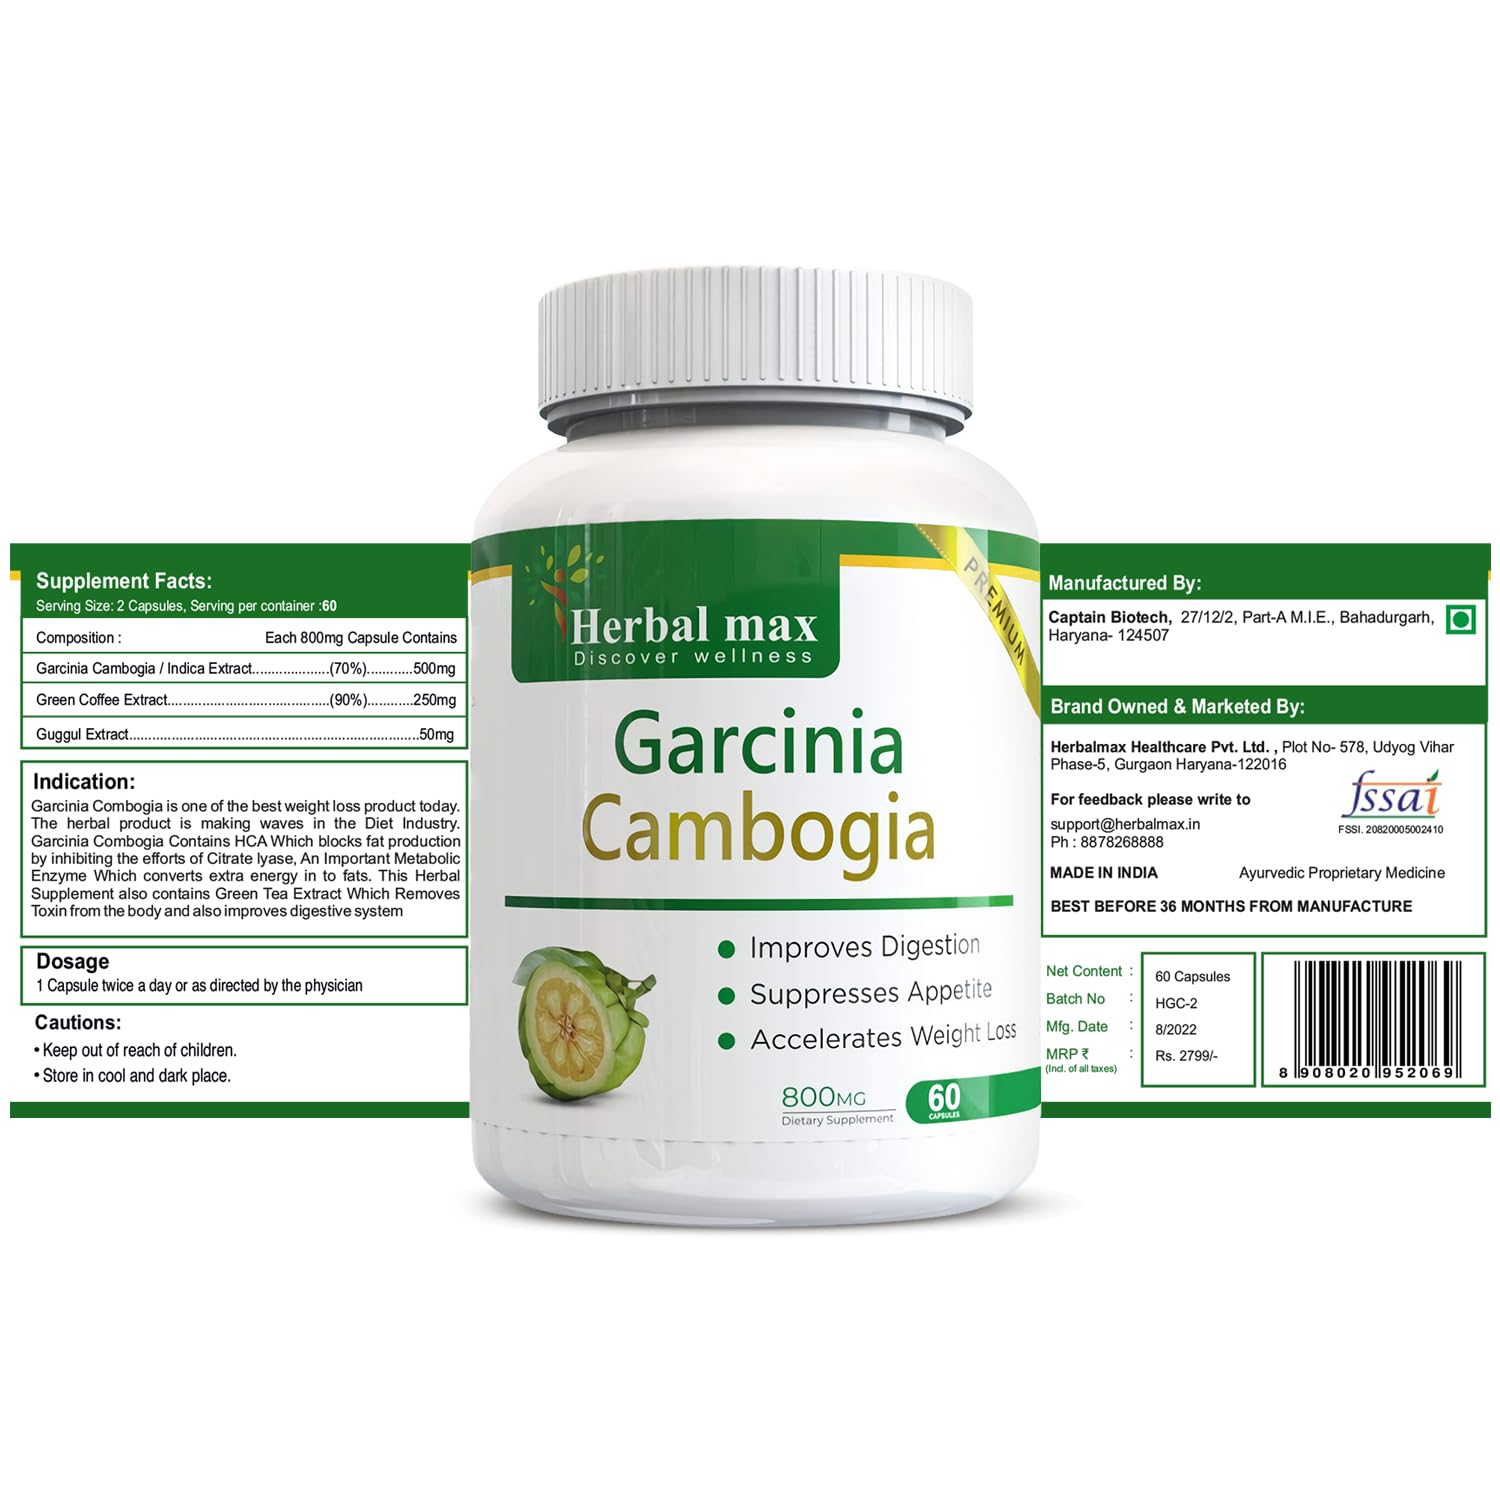 Herbal max Garcinia Cambogia Capsule with 70% HCA, Green Tea Extract, and Gugull Extract for Weight Management - 60 Capsule (Pack of 1)